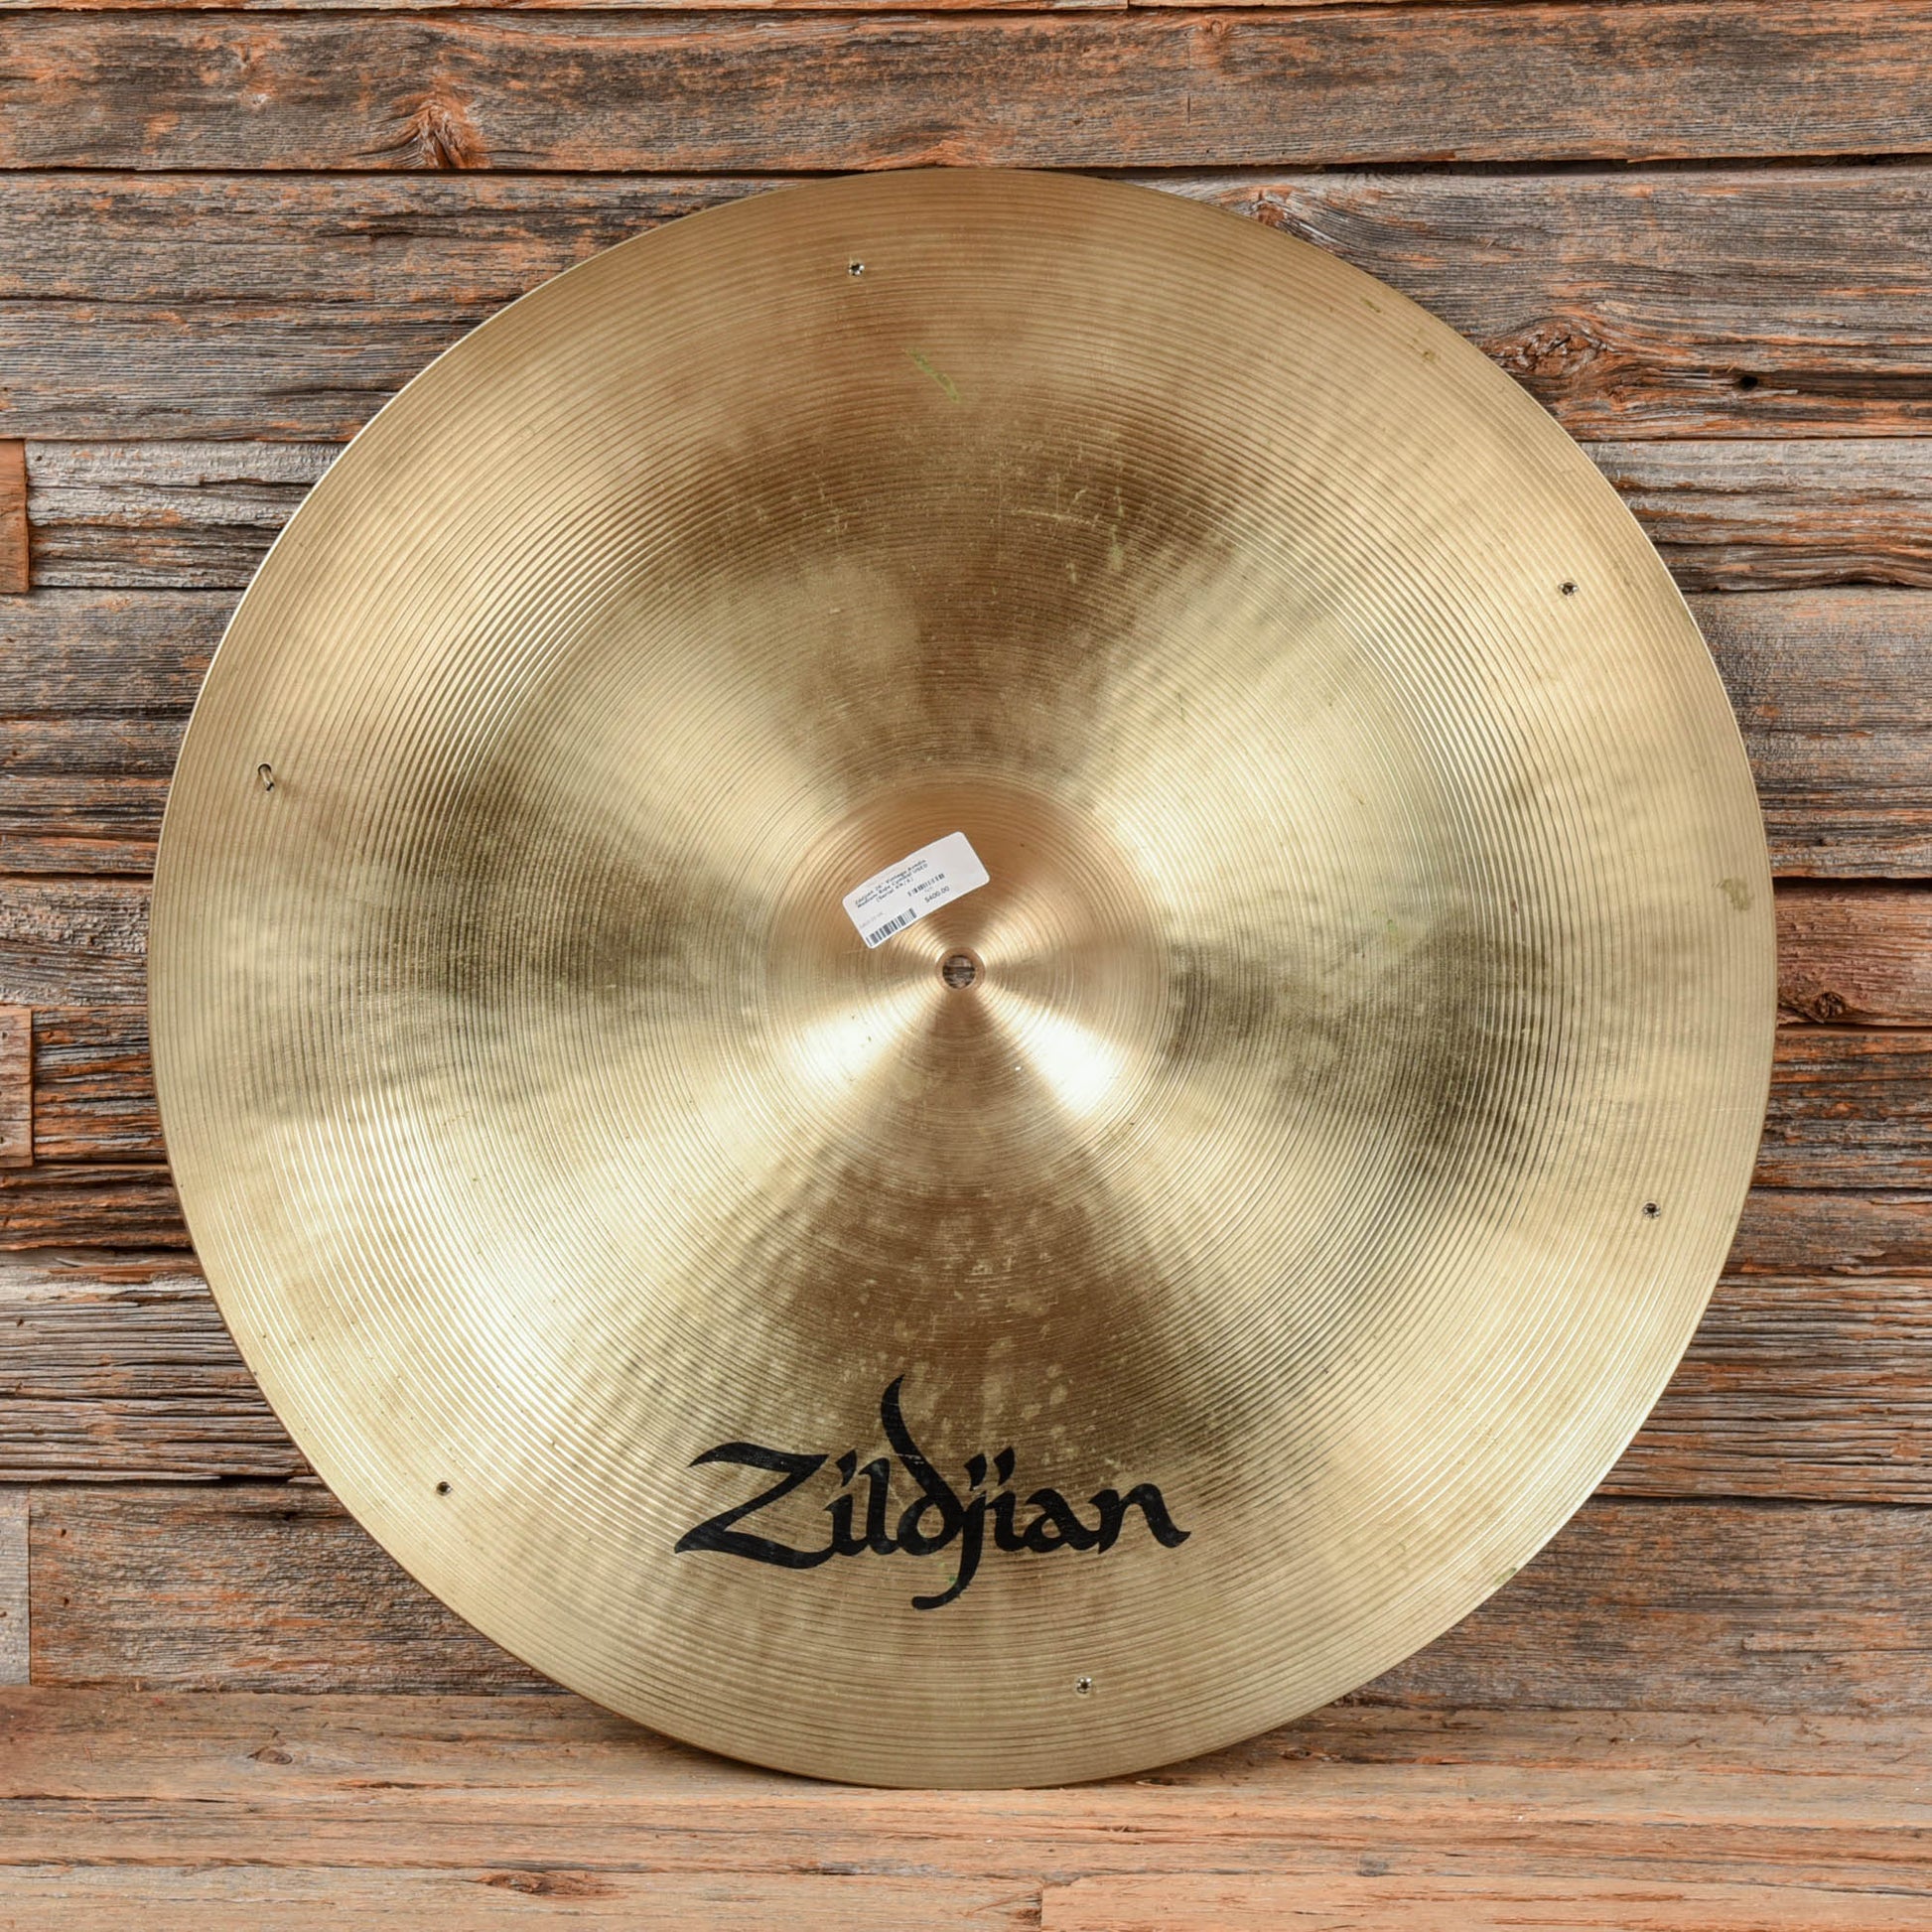 Zildjian 26" Vintage Avedis Medium Ride Cymbal USED Drums and Percussion